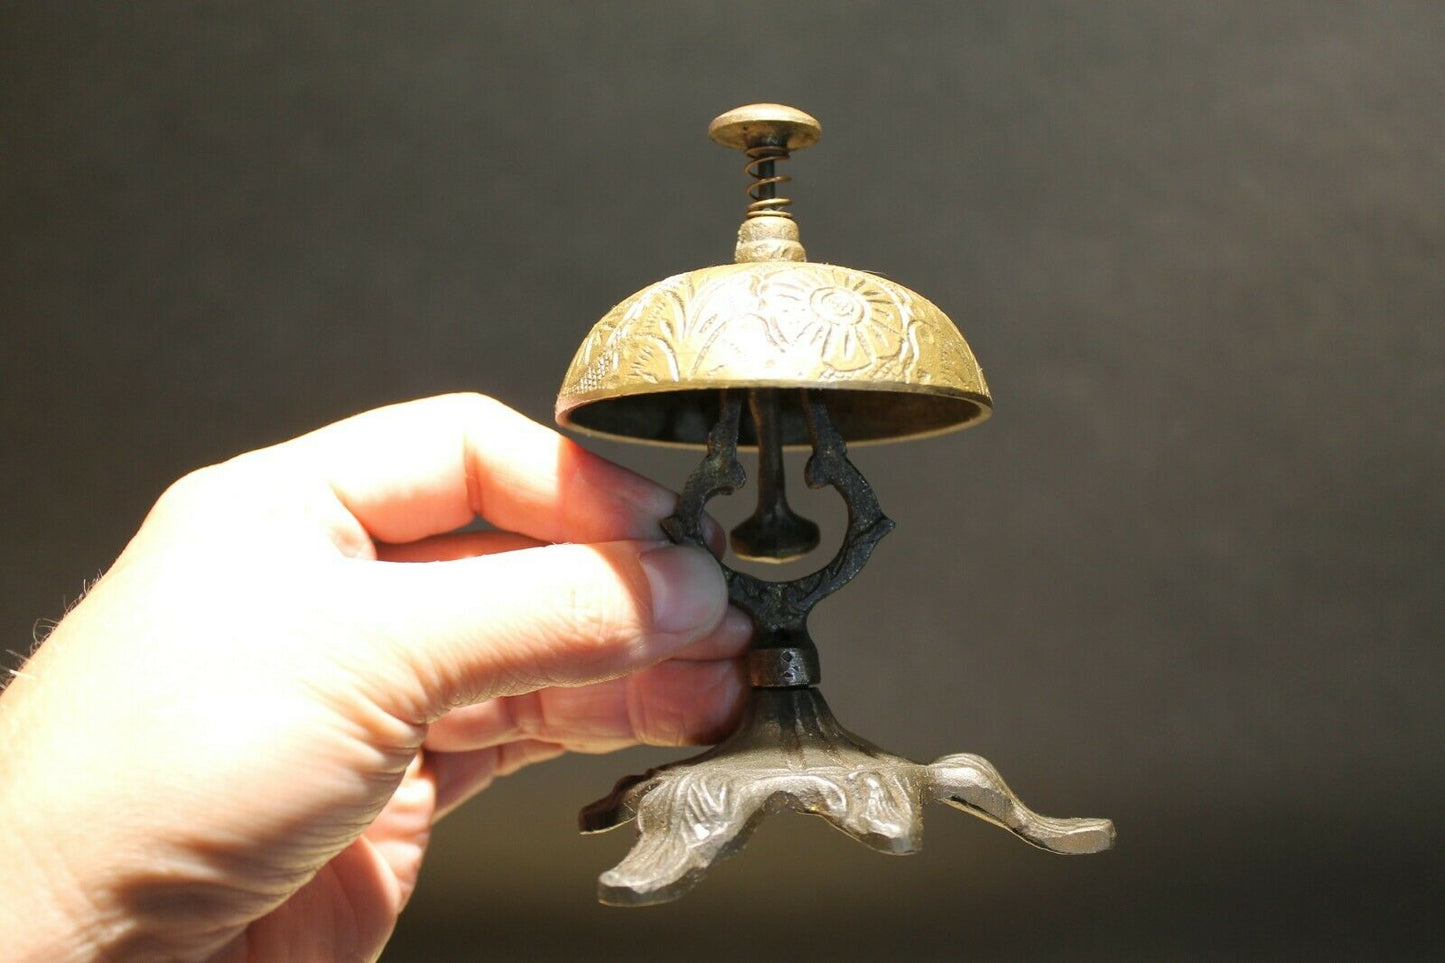 Antique Vintage Style Victorian Brass Iron Hotel Front Desk Service Bell - Early Home Decor